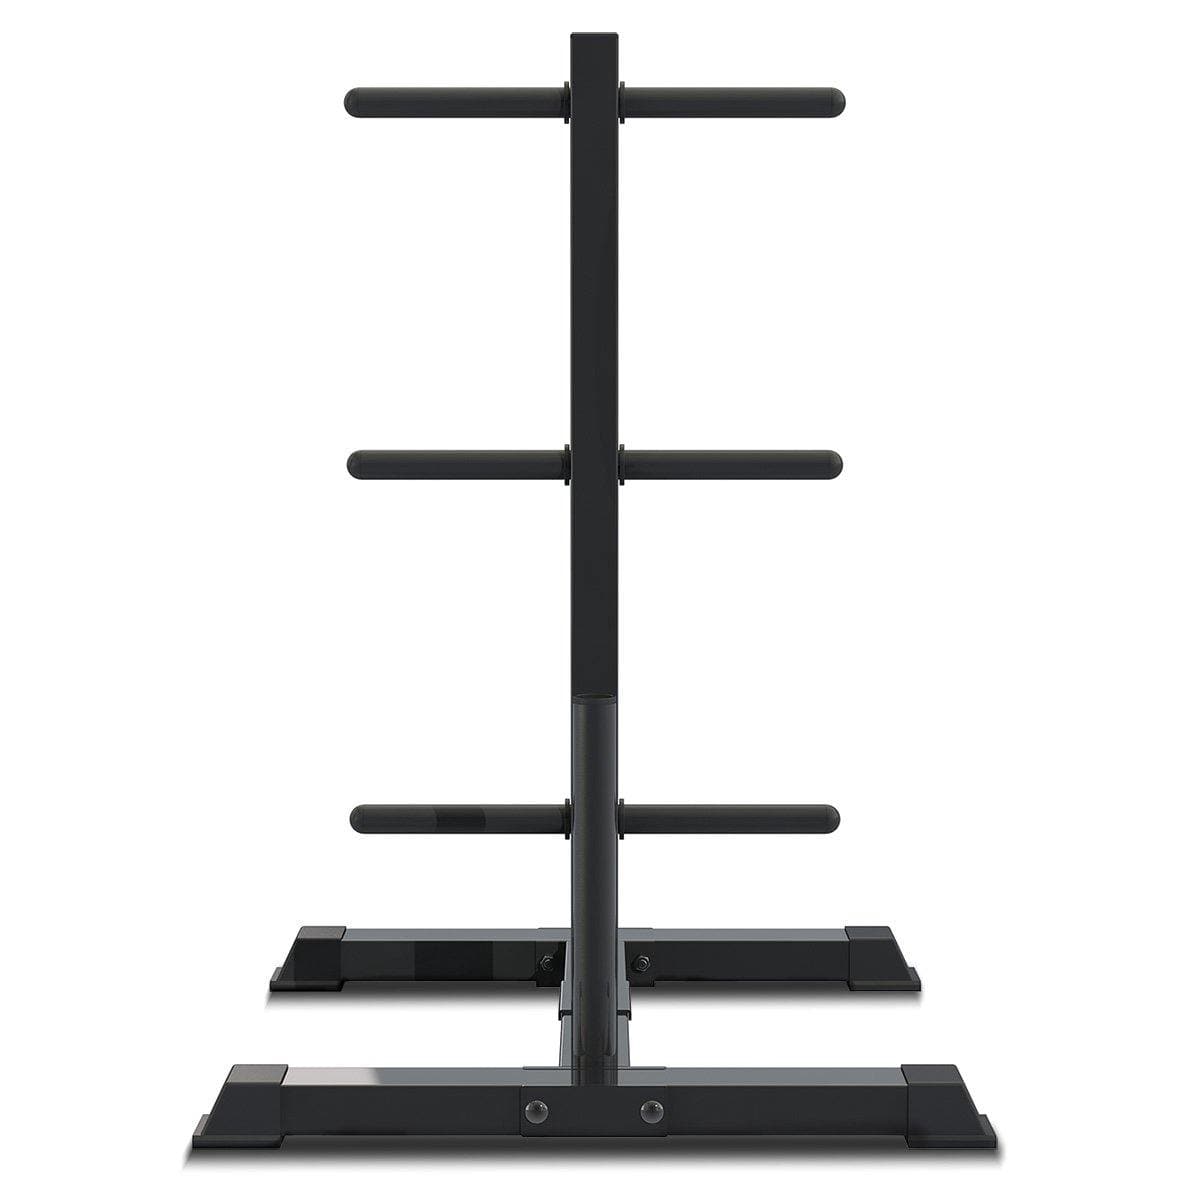 STANDARD WEIGHT TREE with 2 bar holders - Musclemania Fitness MegaStore